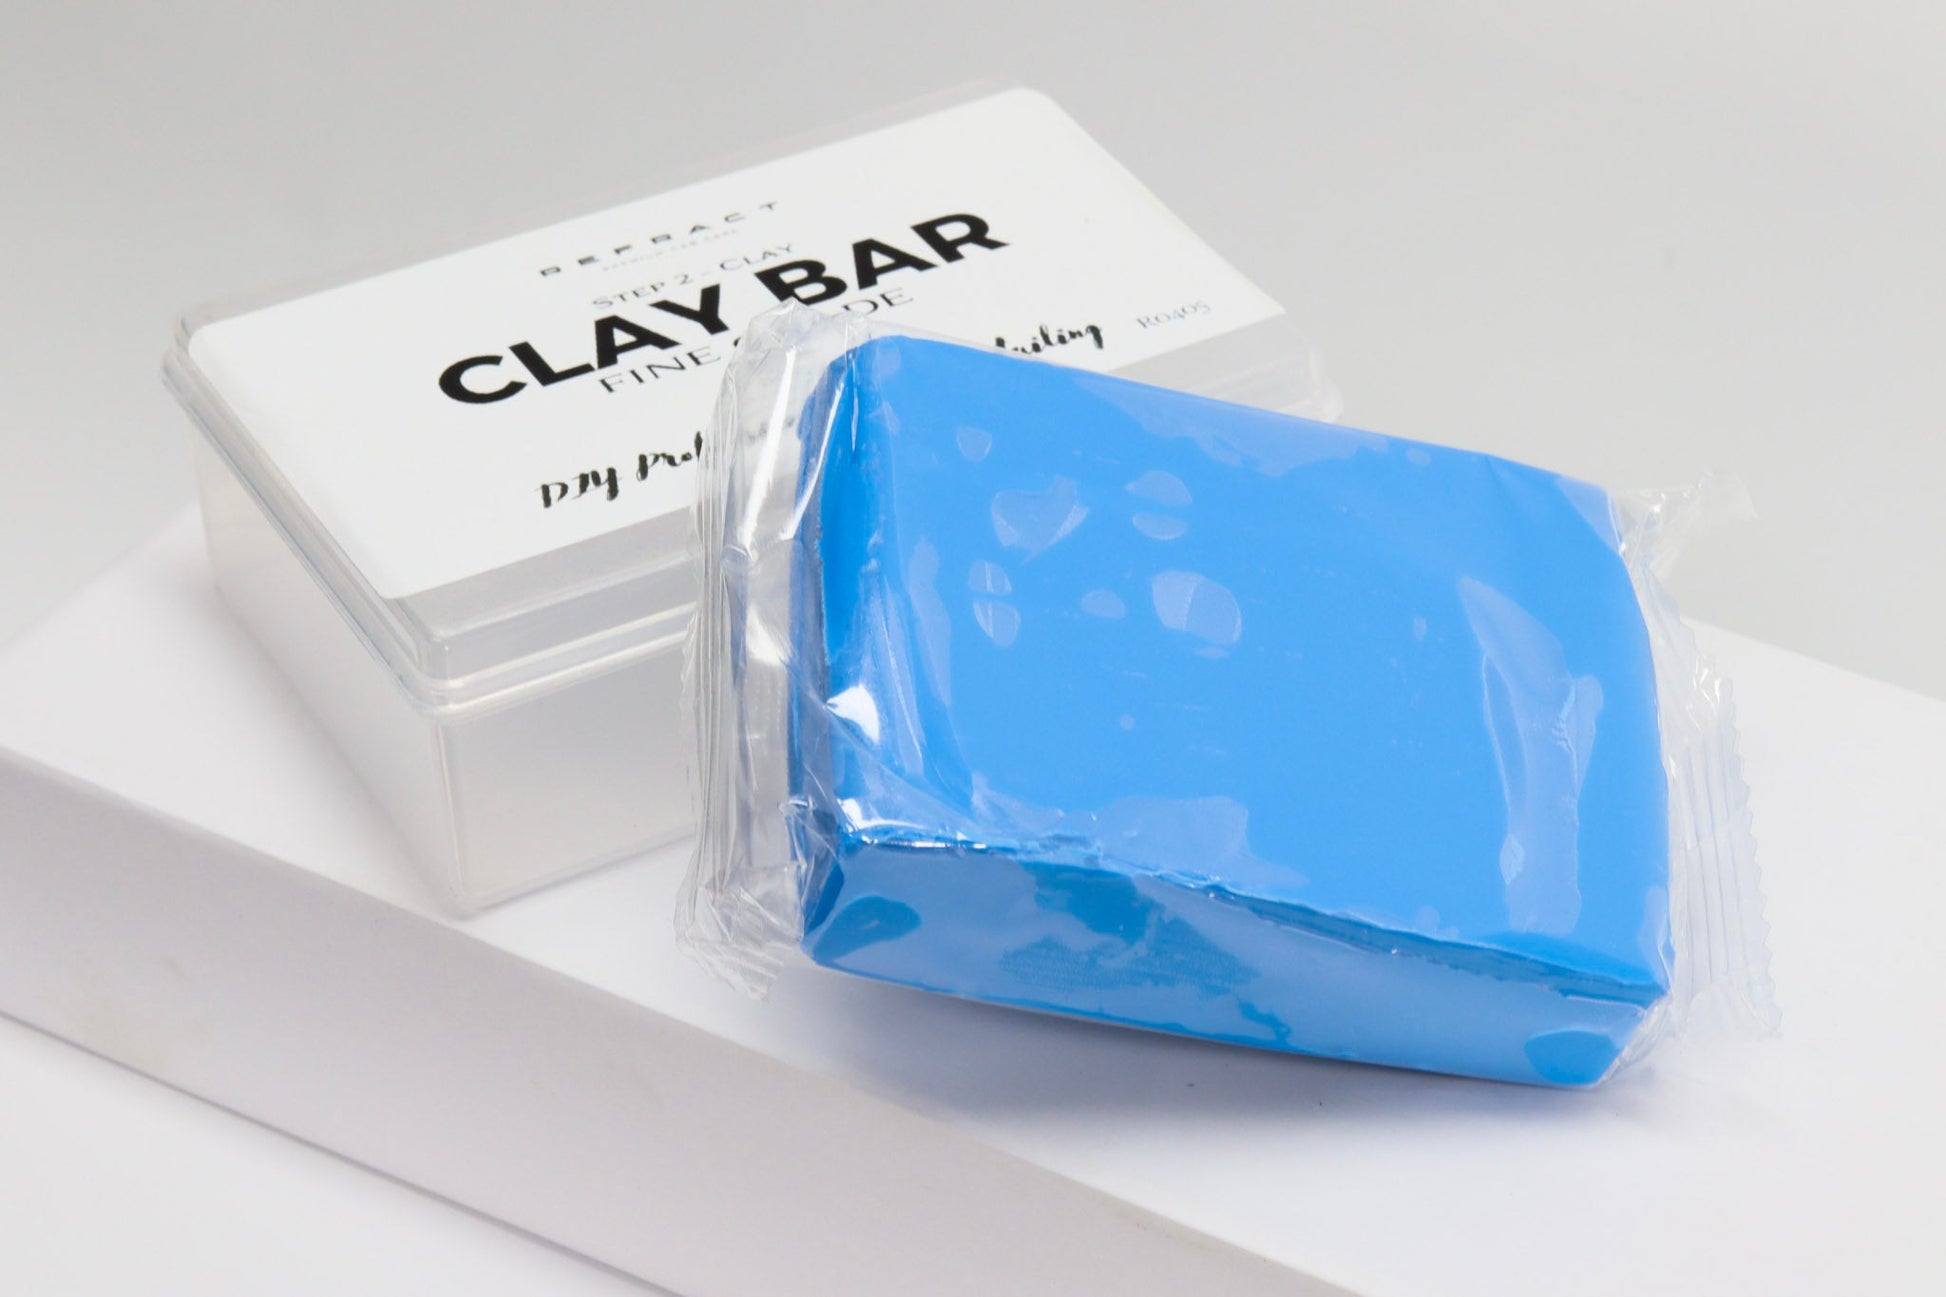 Refract Premium Car Care Products Refract 150g Fine Grade Clay Bar $18.95